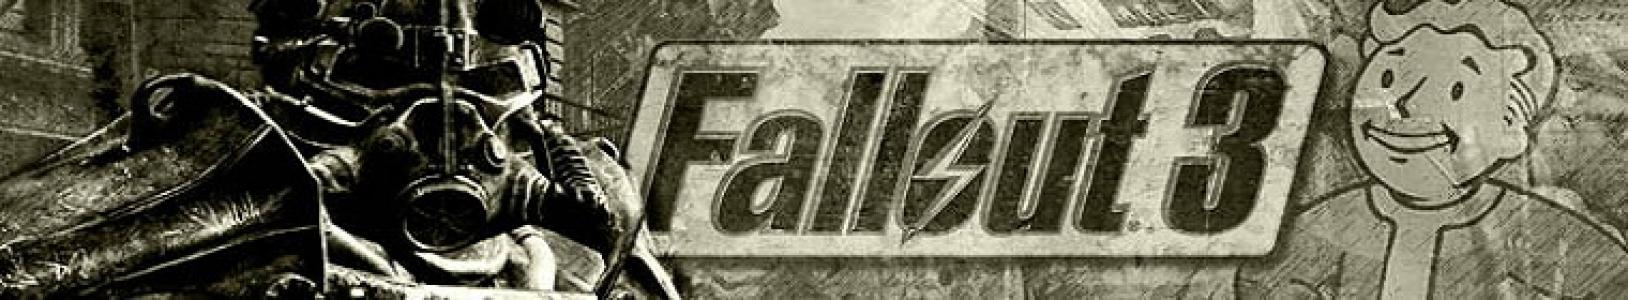 Fallout 3 banner